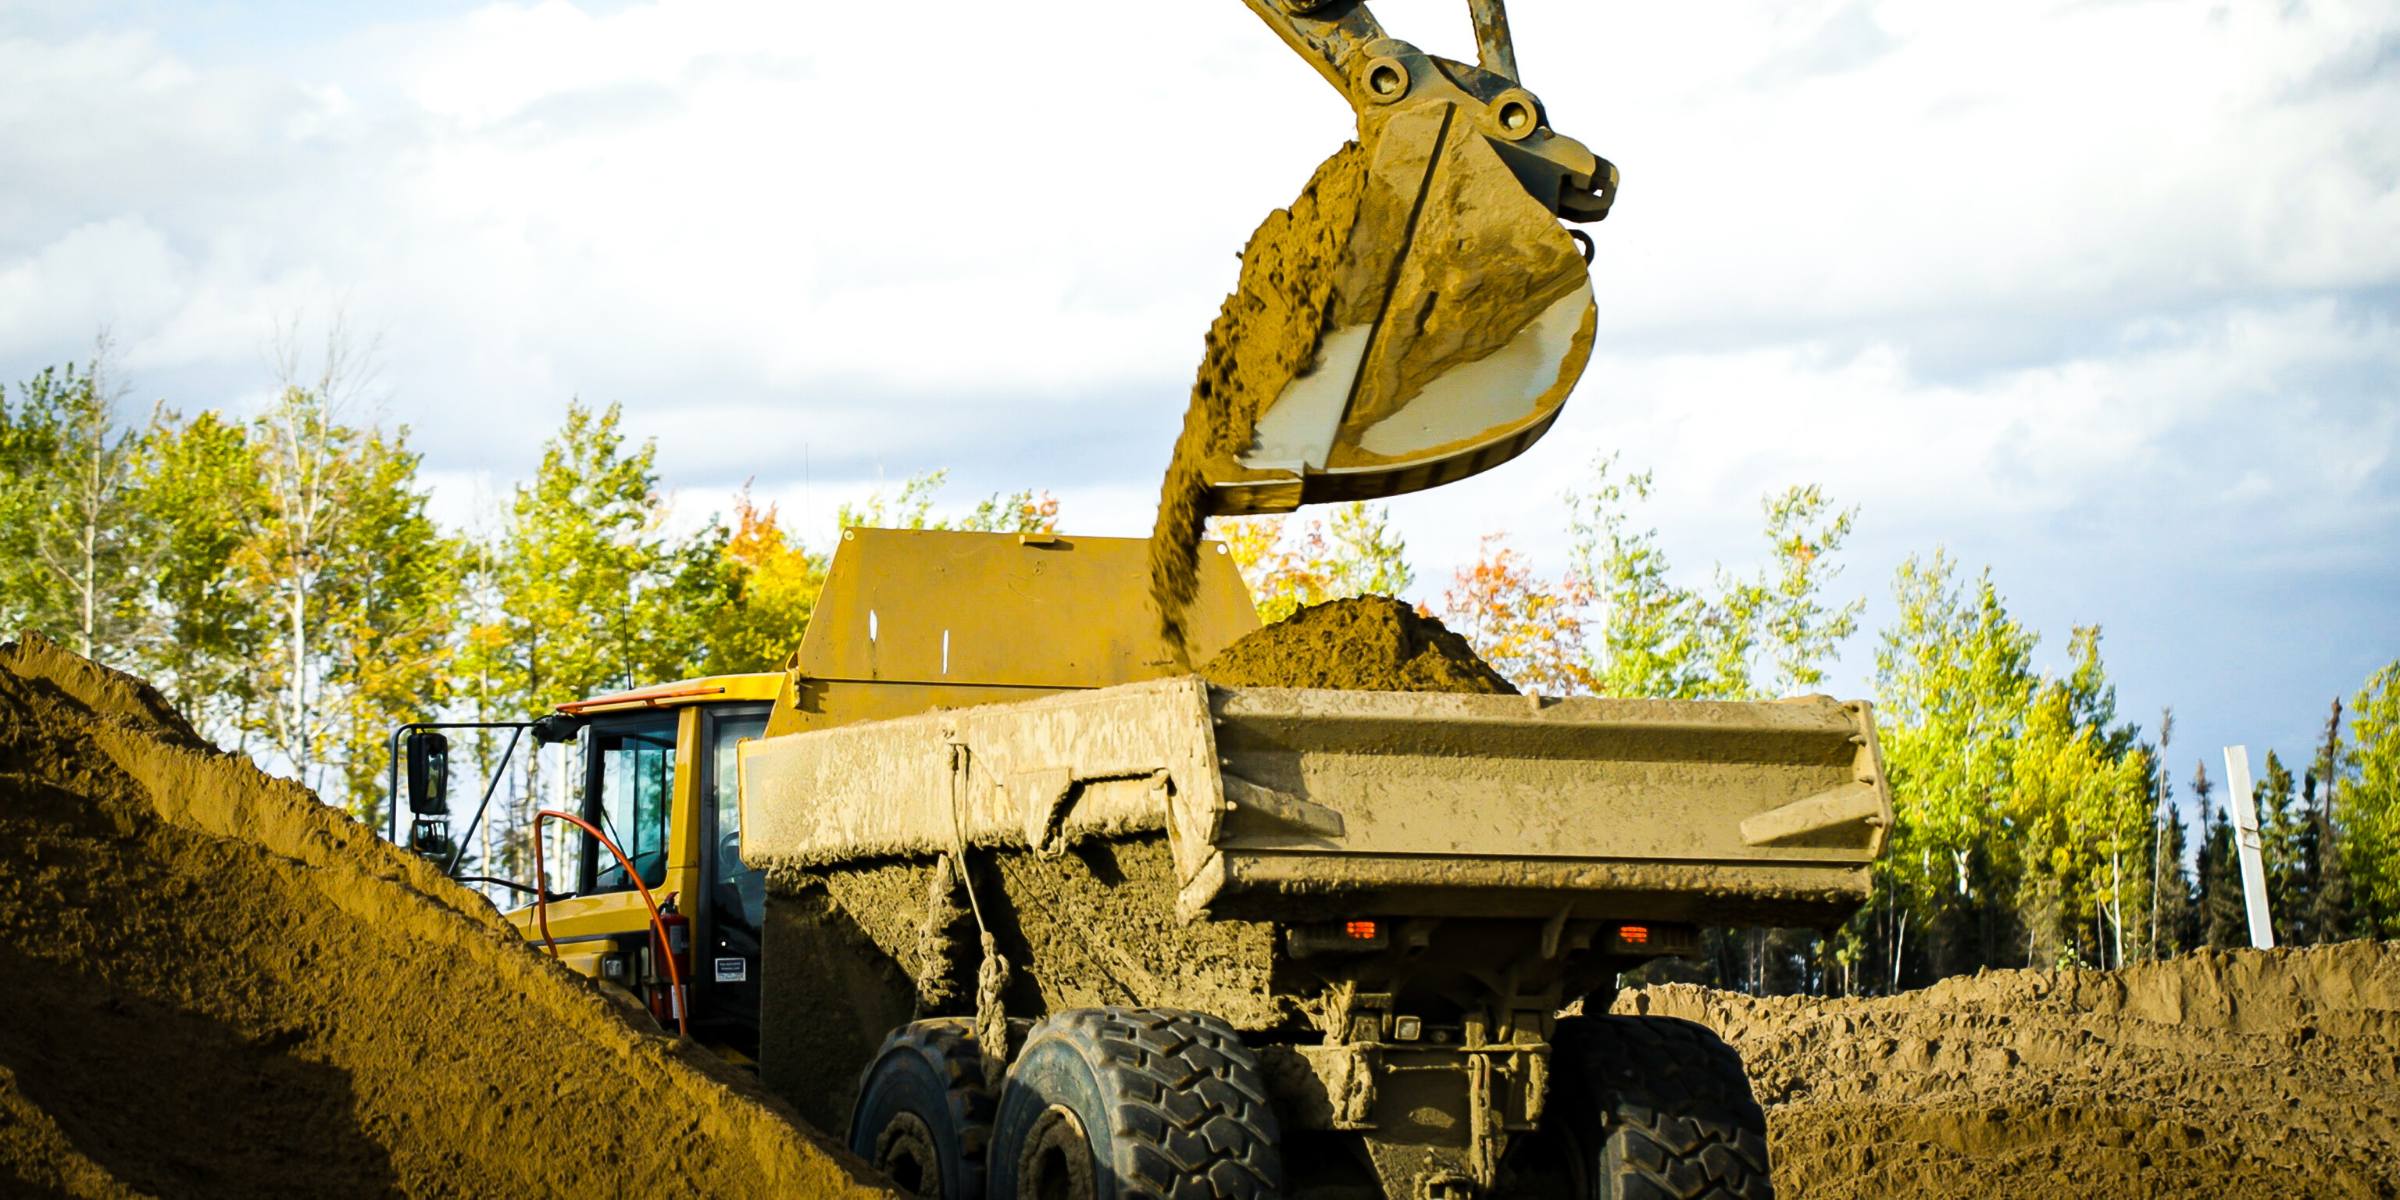 Dump truck being loaded by excavator during roadbuilding project